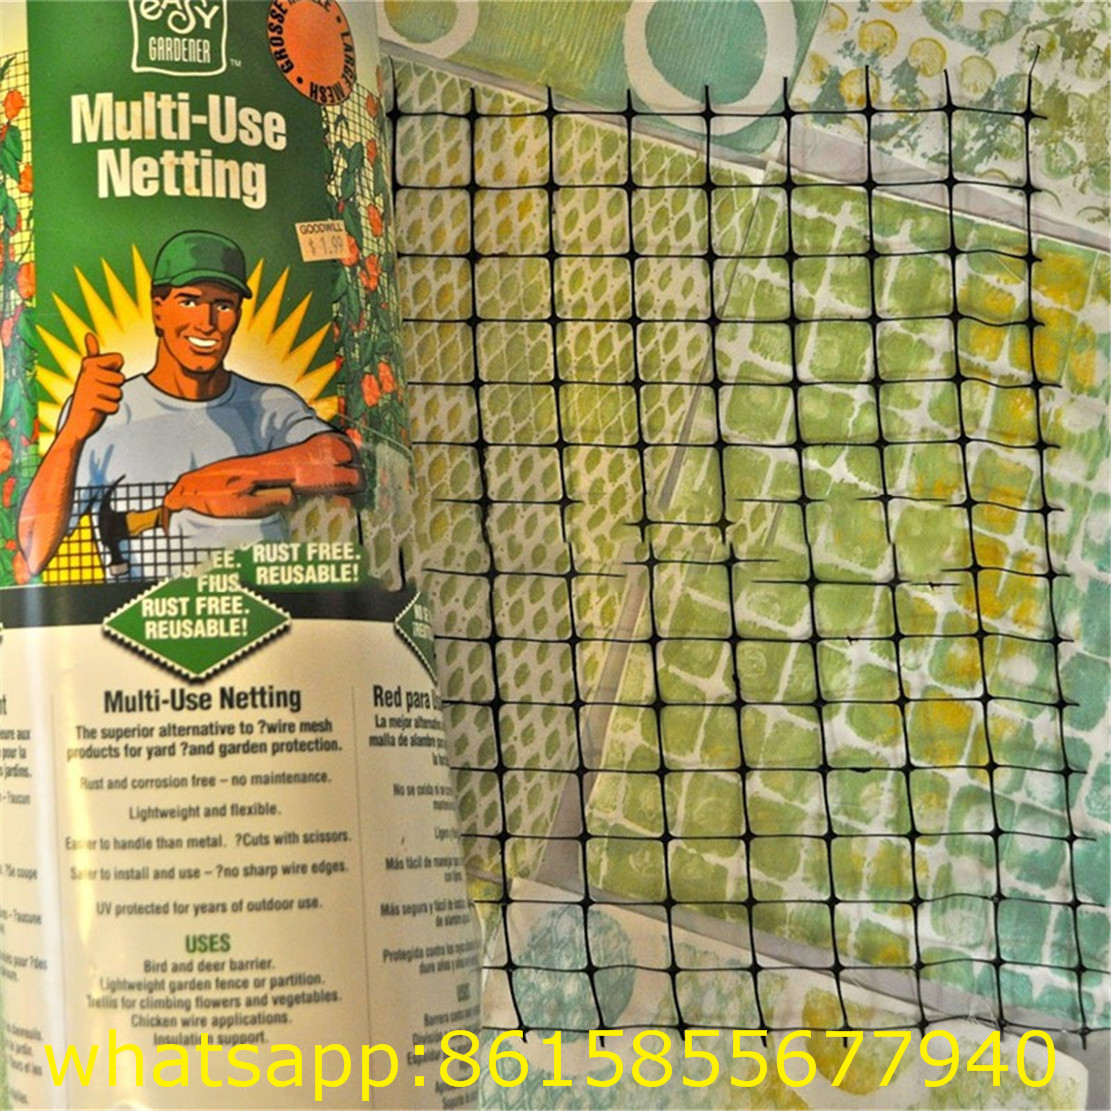 Plastic PP Extruded Anti Mole Netting to Protect Your Yard